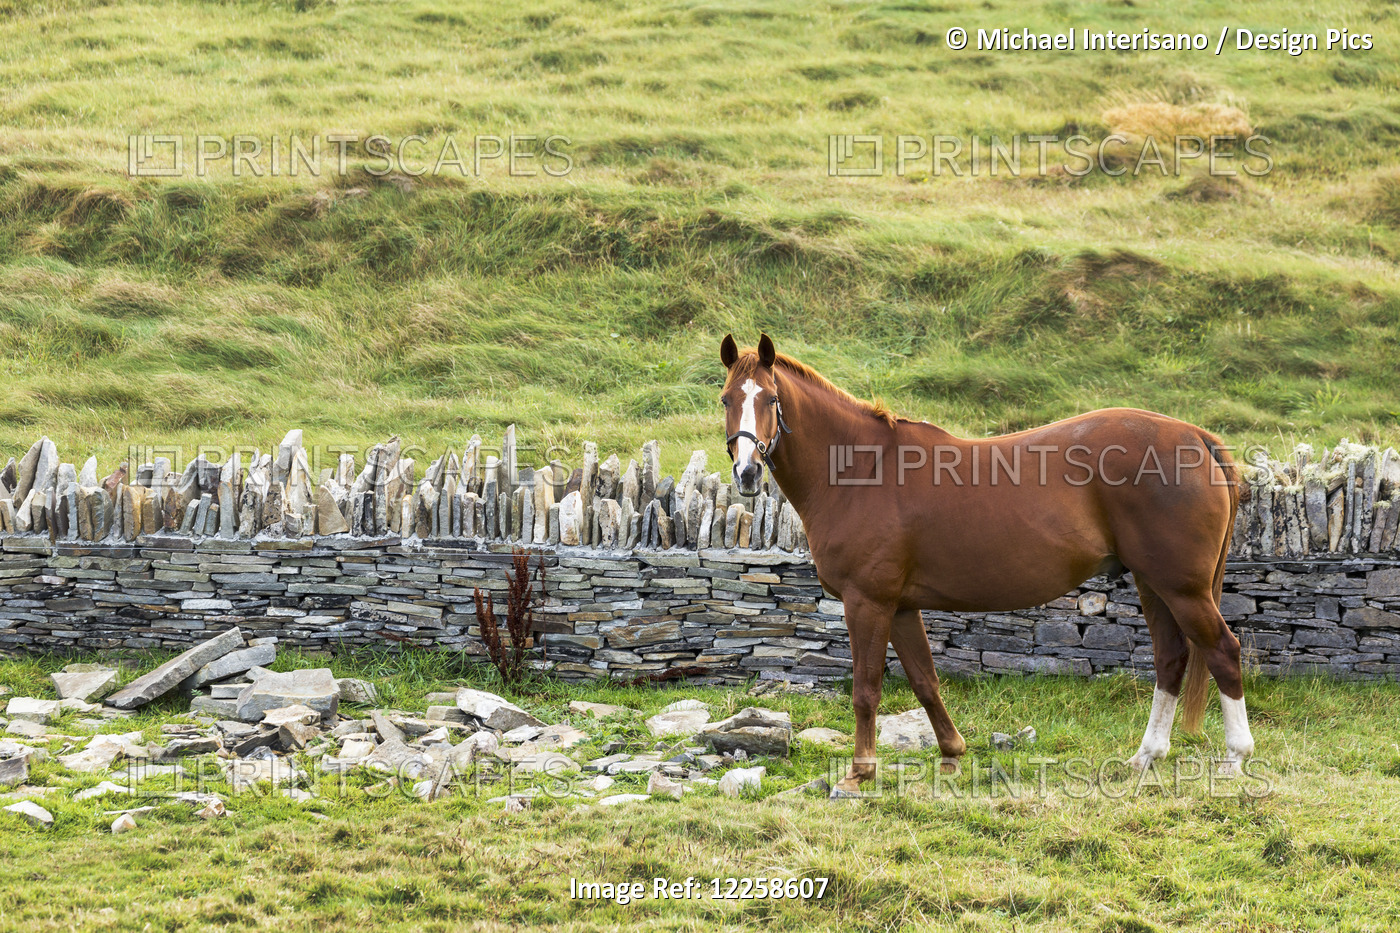 Single Horse In A Grassy Field With Rocks And Stone Fence; Kilkee, County ...